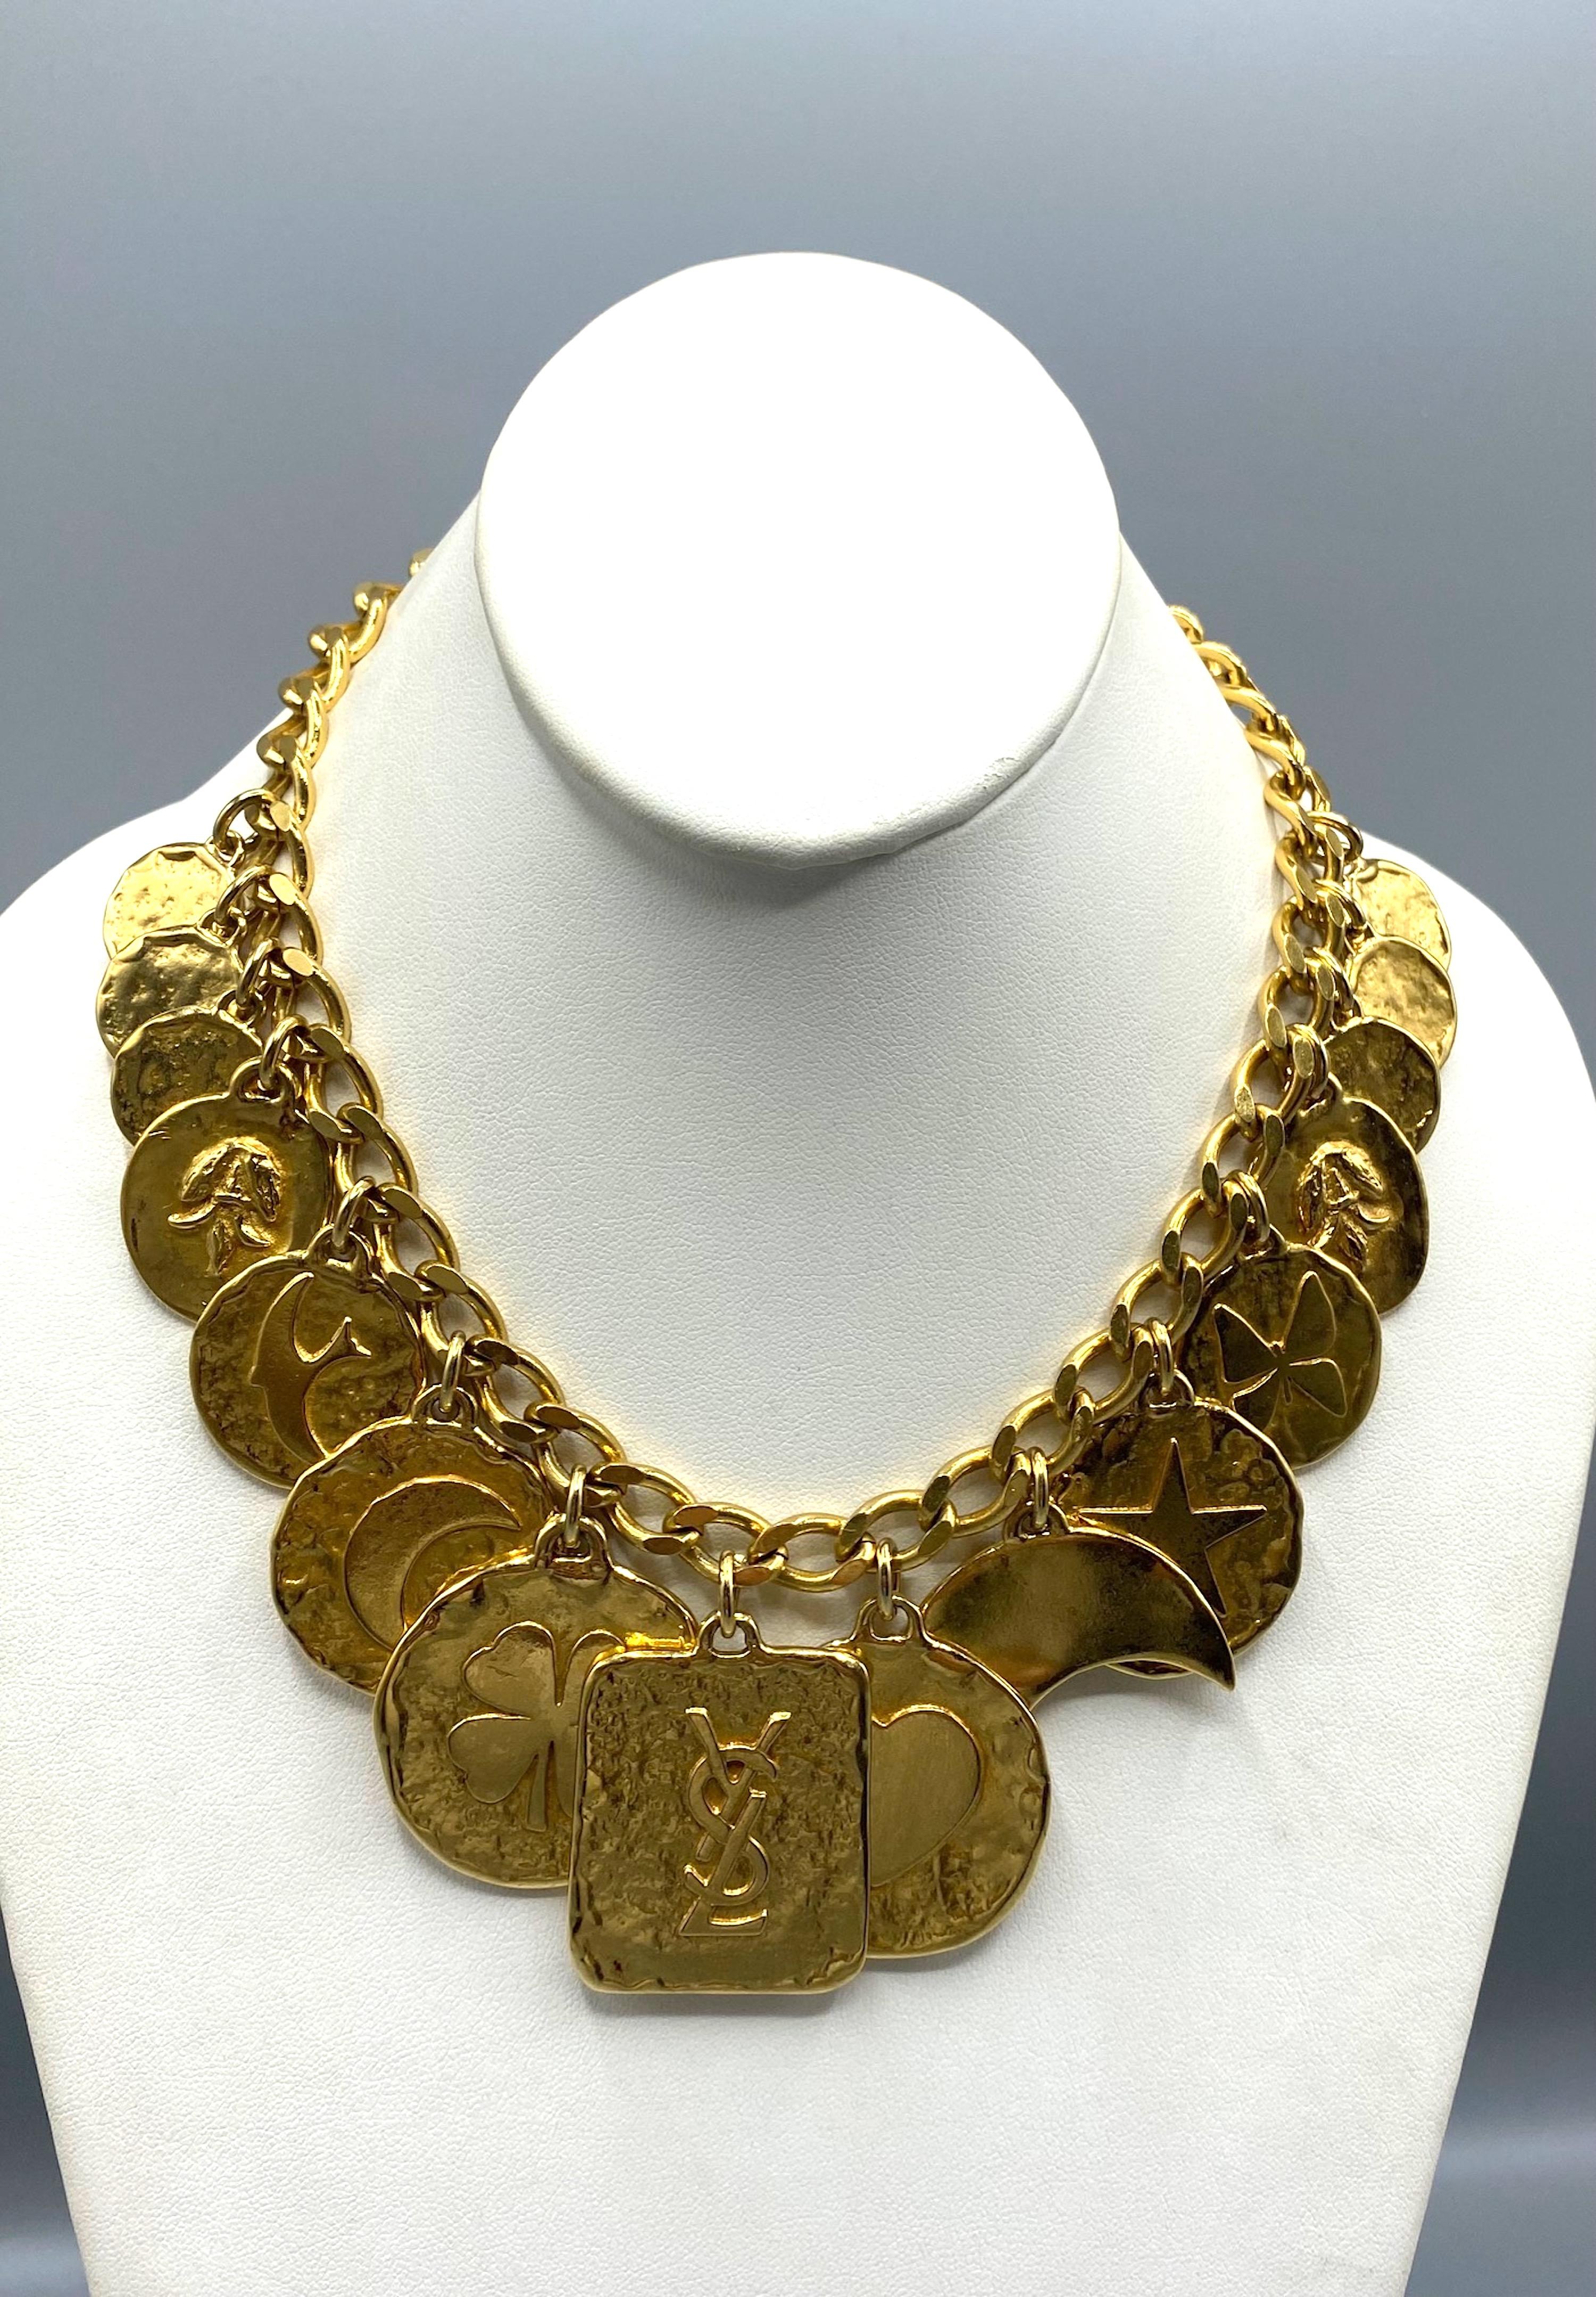 A wonderful 1980s Yves Saint Laurent gold set consisting of a chain necklace with 15 large charms with various design and a chain bracelet with 8 matching charms. The center charm has the YSL logo on the necklace. The other charms feature a single